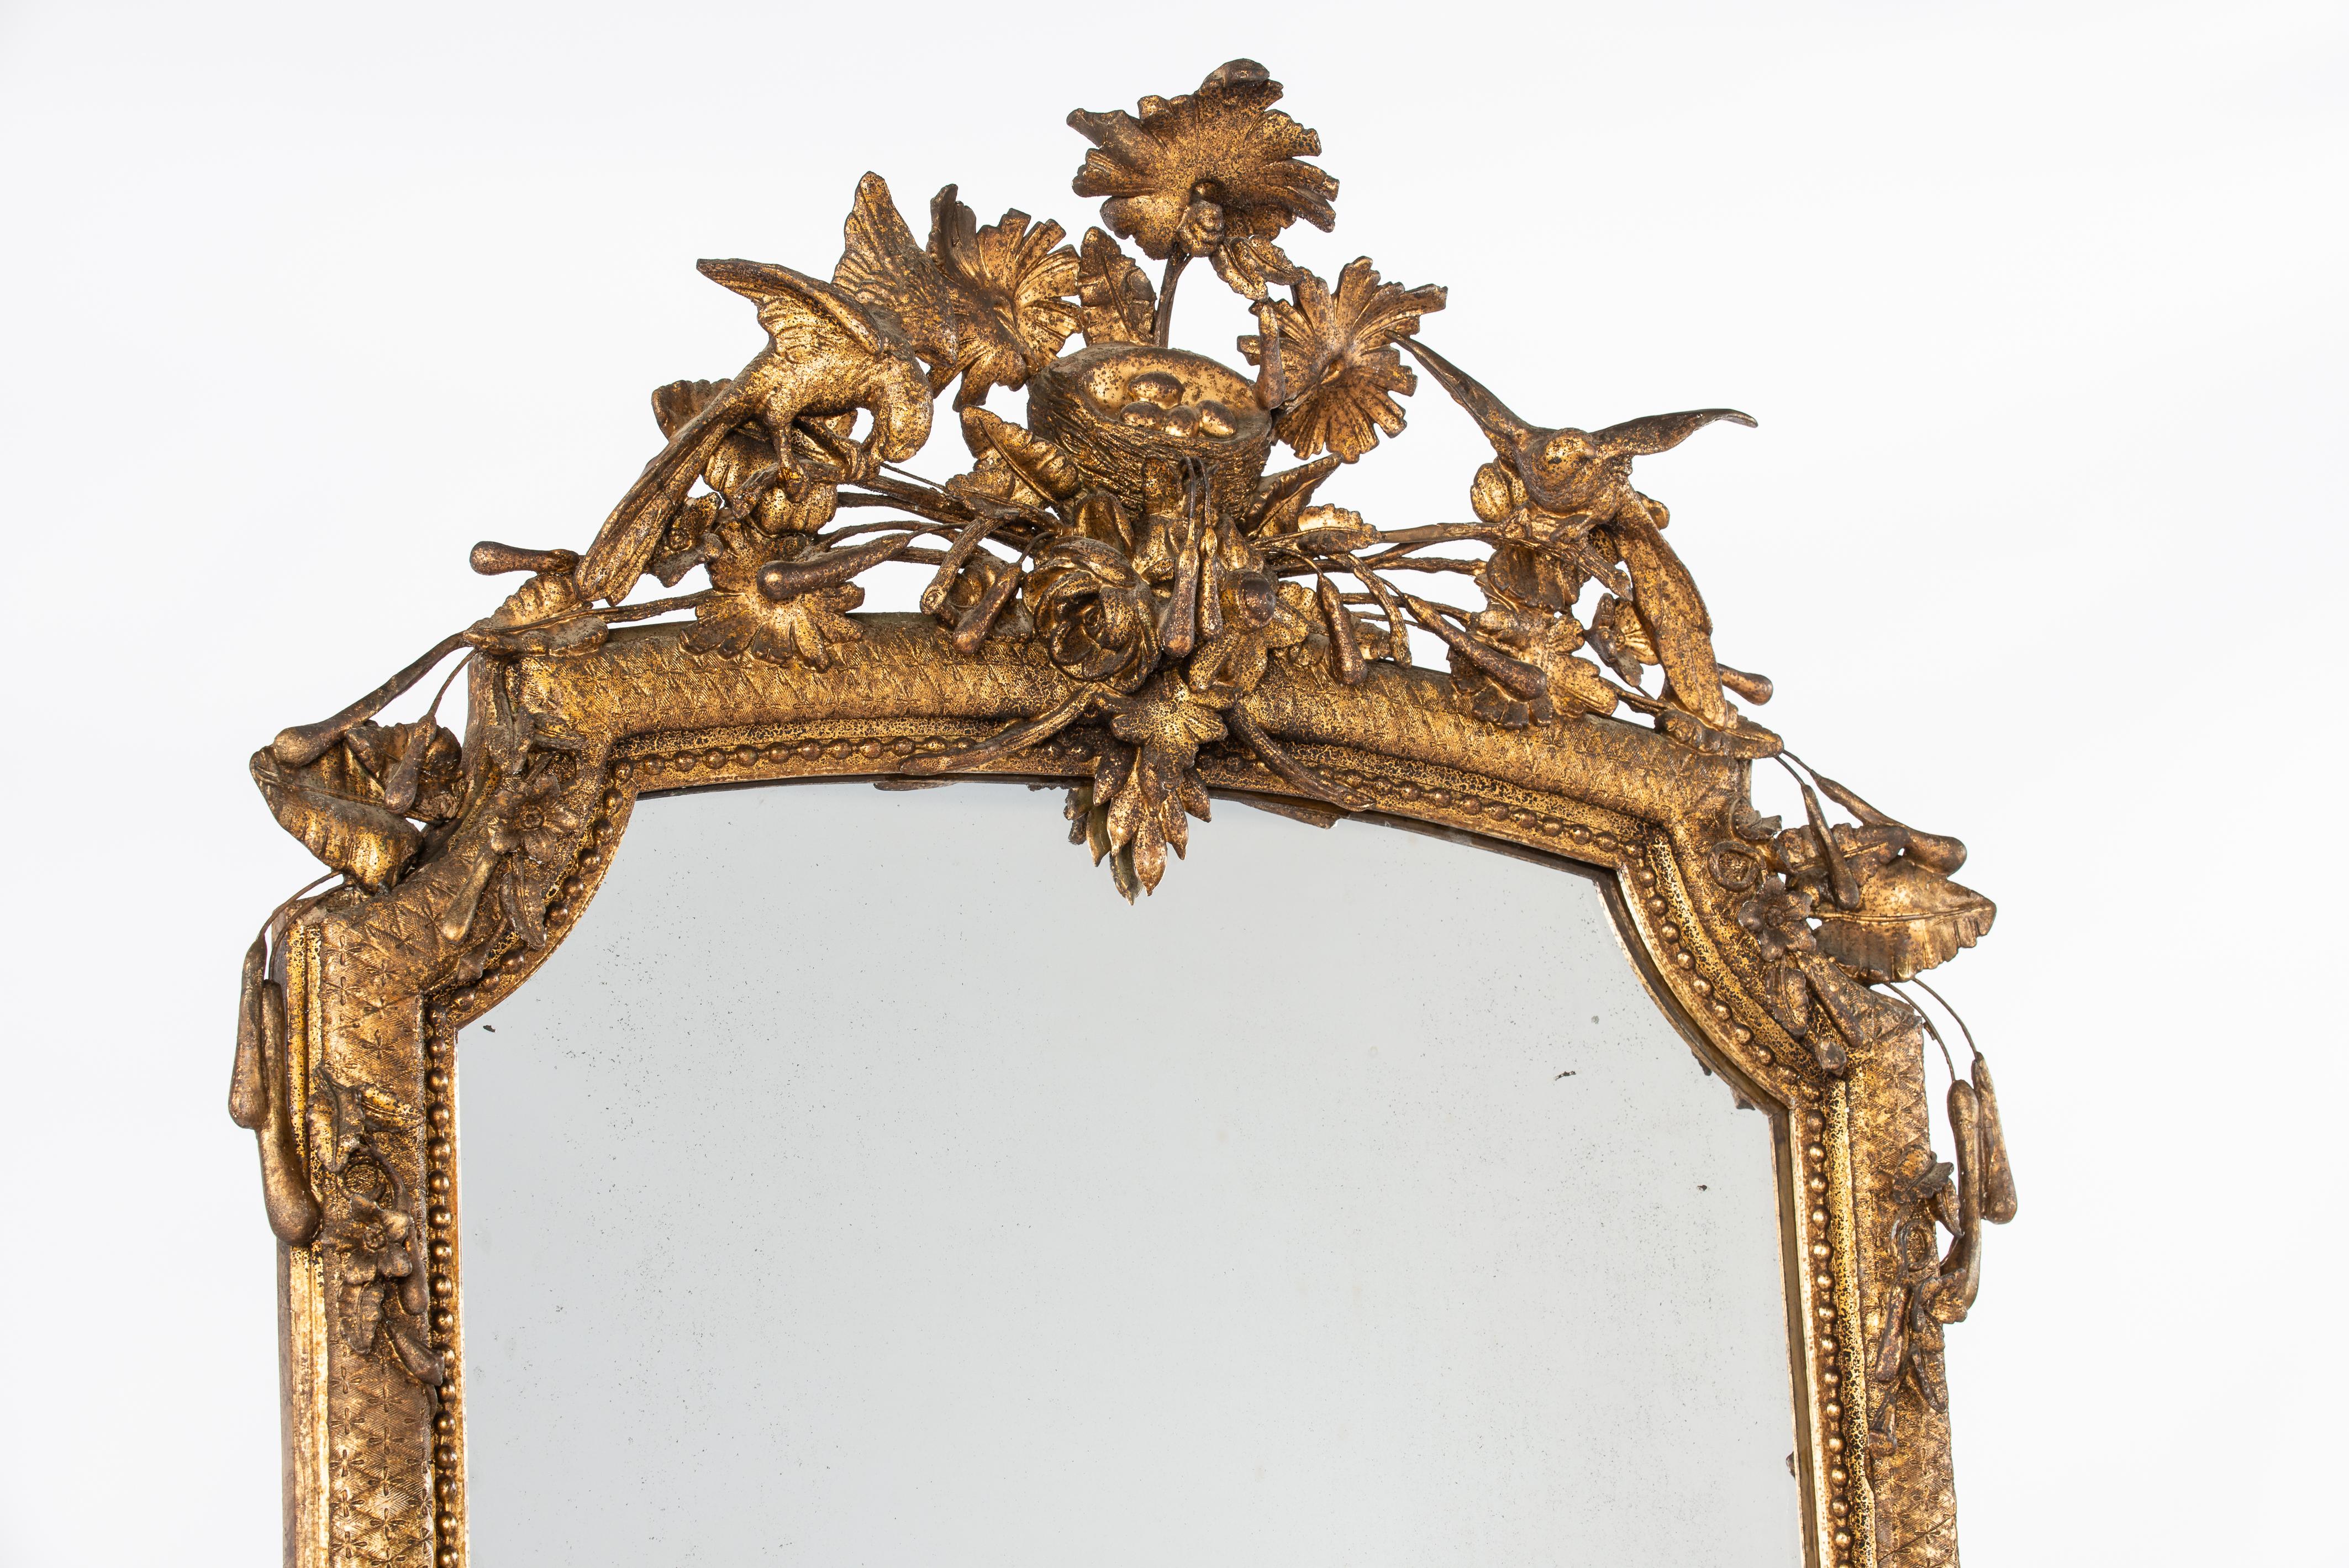 On offer here is a stunning and rare tall pier mirror that was made in Southern France in the mid-19th century, circa 1850. The mirror frame is lavishly adorned with many natural ornaments such as flowers, leaves, and reed plumes. At the top of the